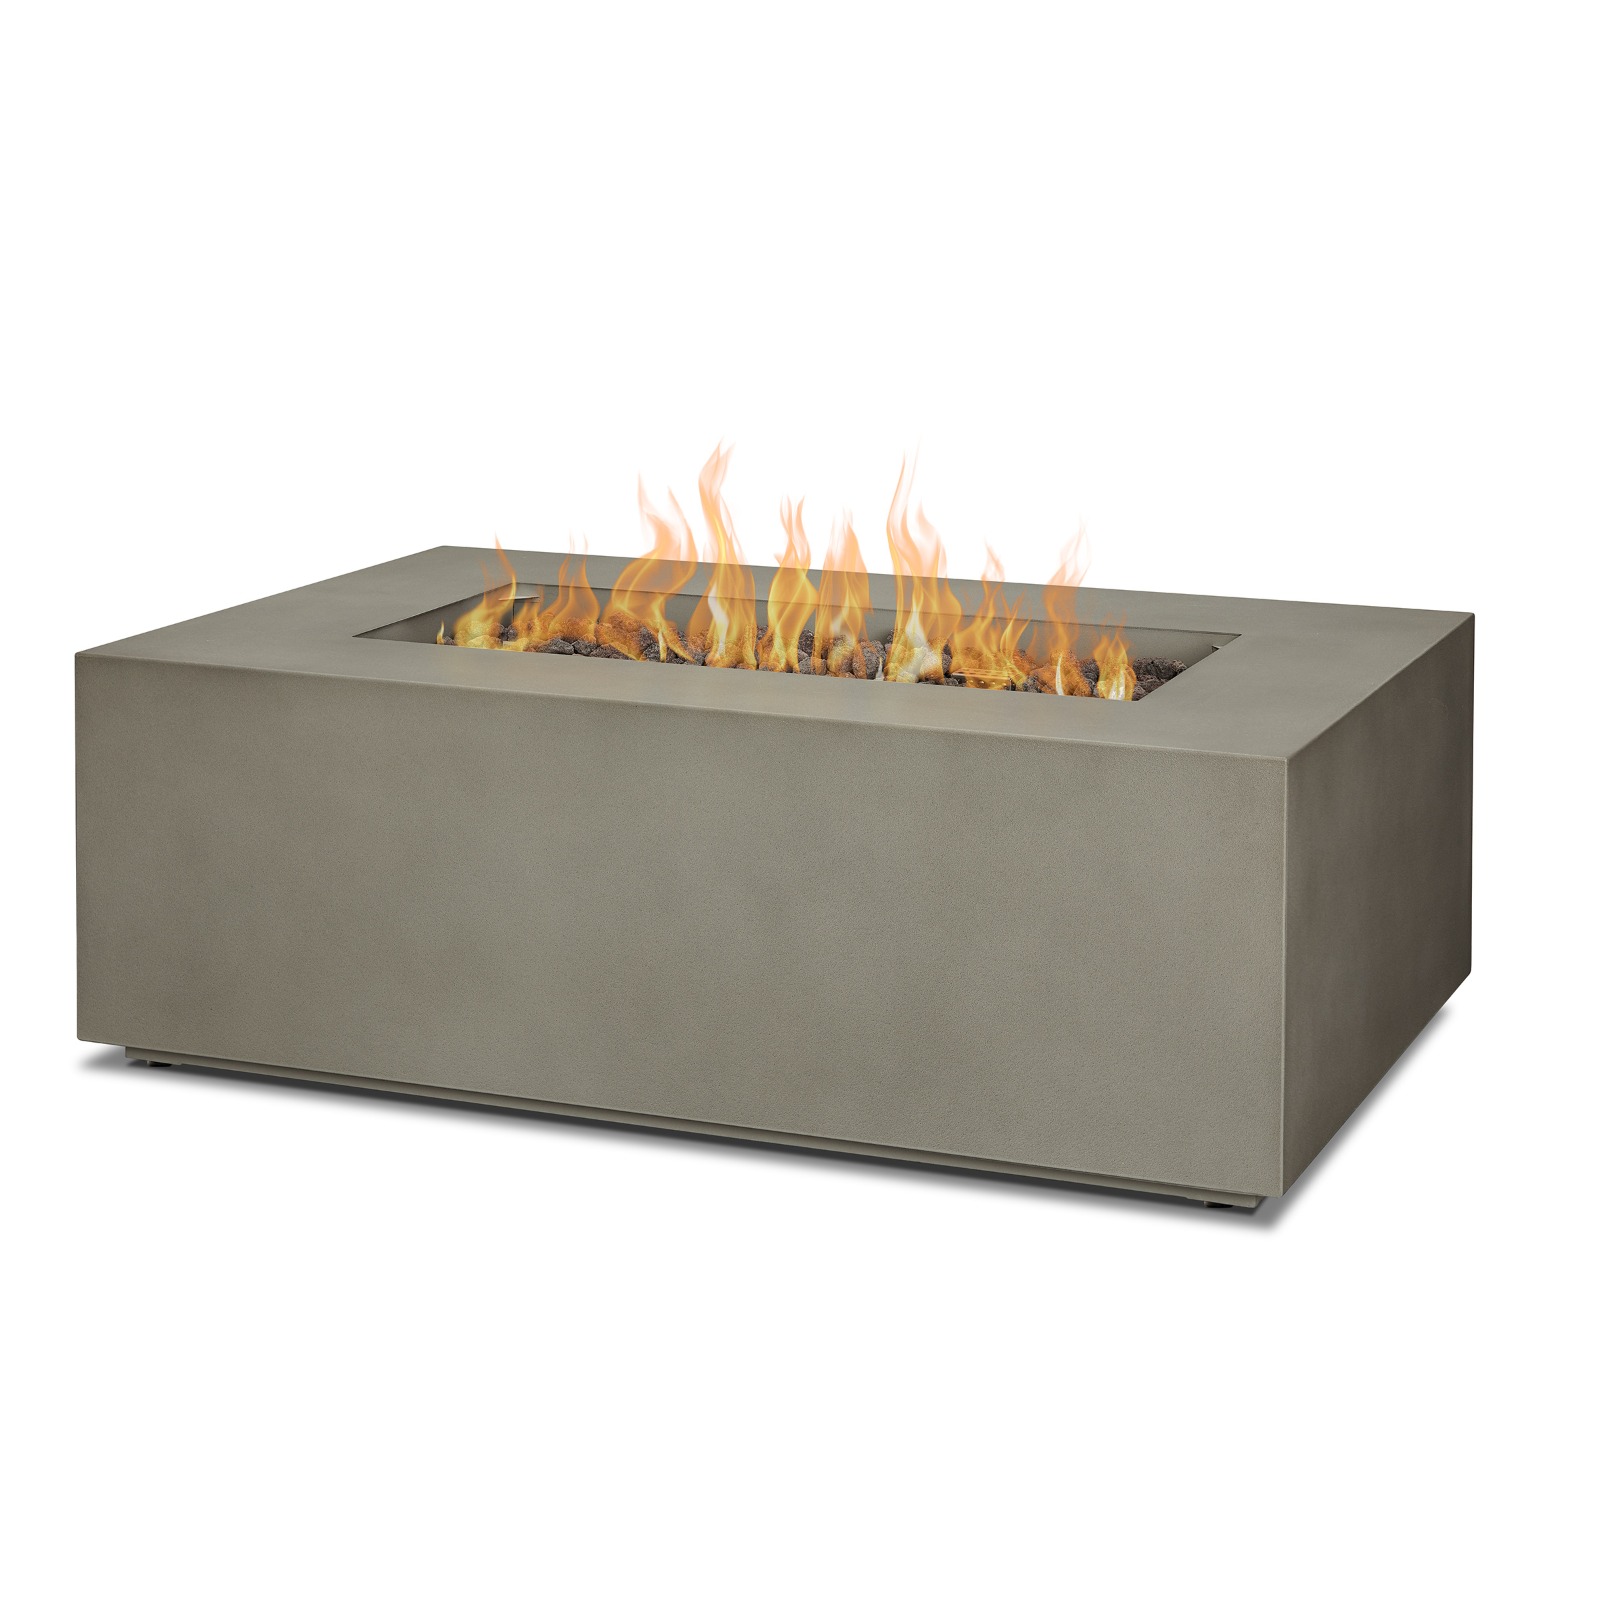 Aegean 42" Rectangle Propane Fire Pit Outdoor Fireplace Fire Table for Backyard or Patio